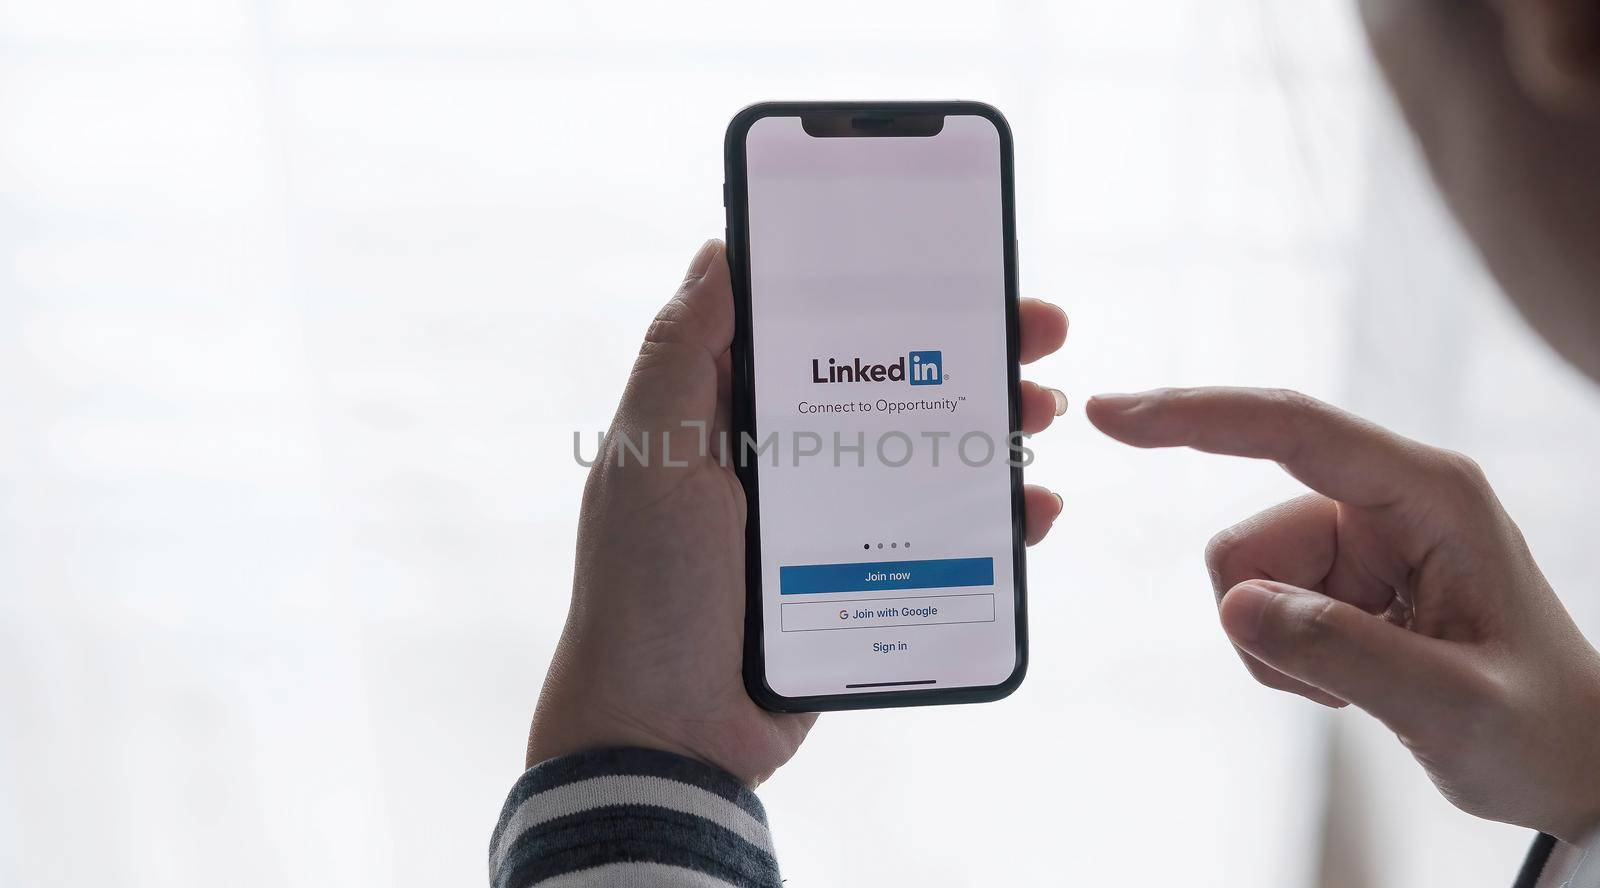 CHIANG MAI, THAILAND, JUL C12, 2021 : A women holds Apple iPhone Xs with LinkedIn application on the screen.LinkedIn is a photo-sharing app for smartphones. by wichayada